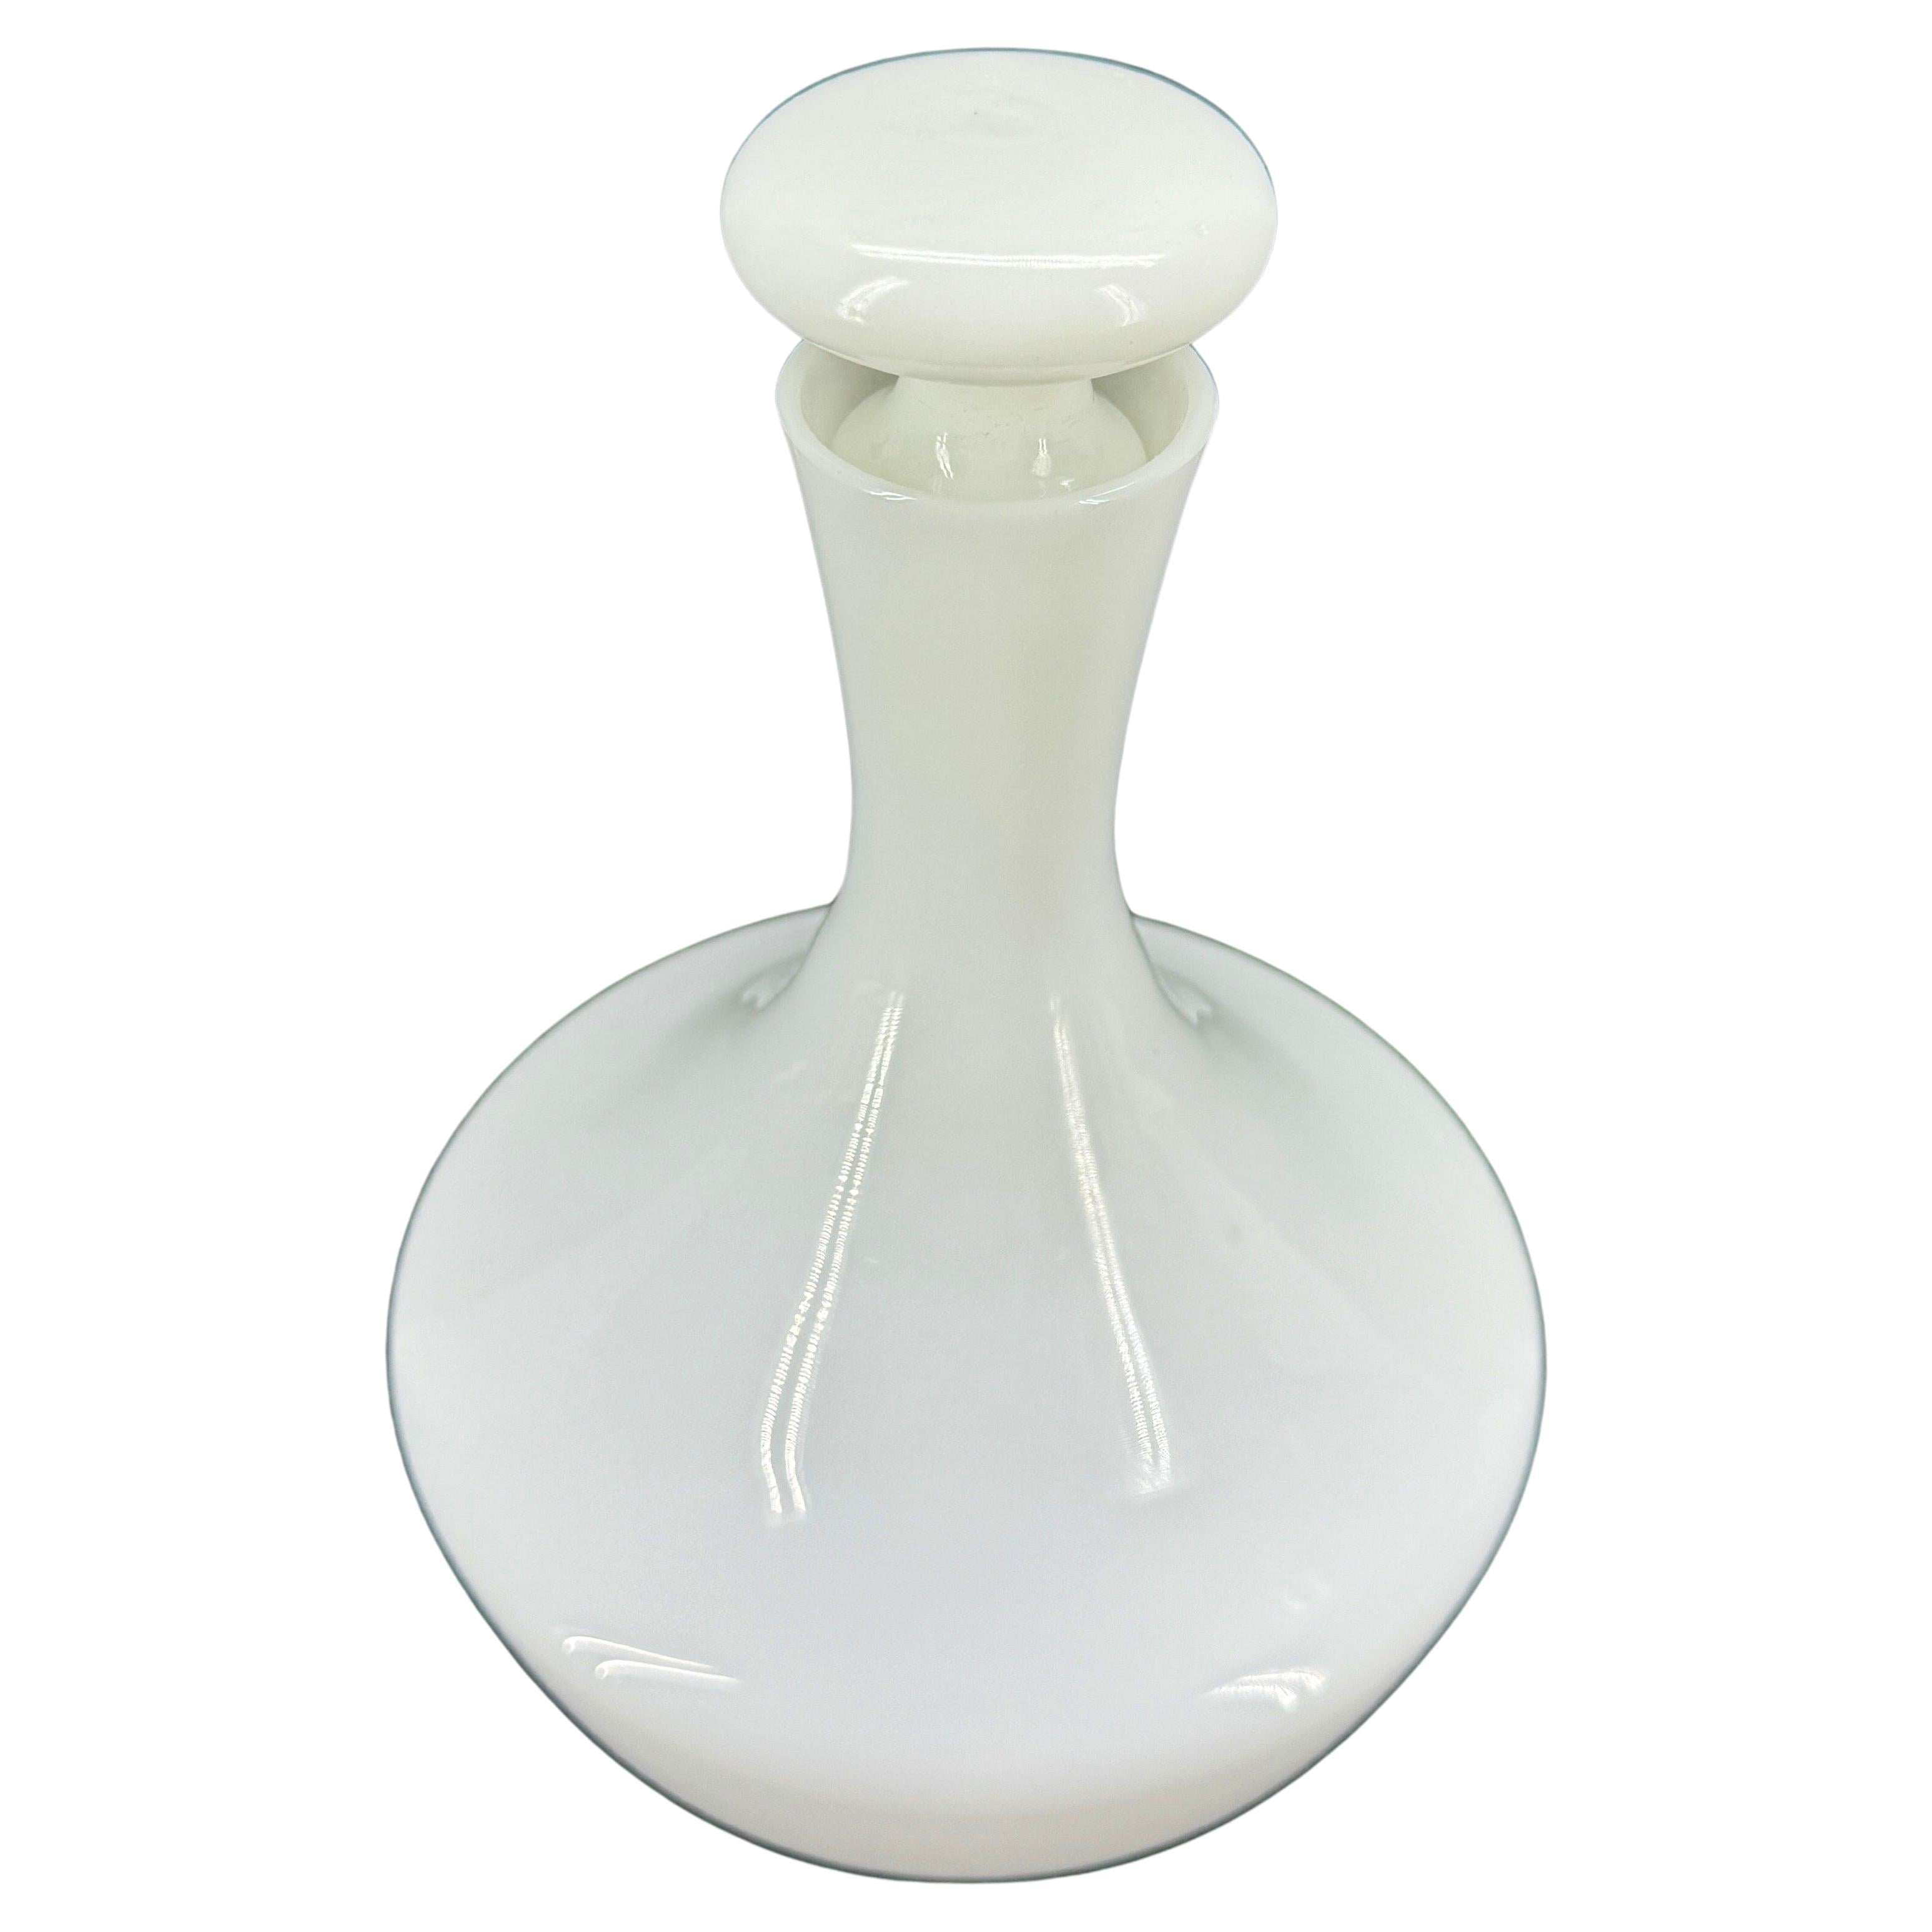 Mid-Century Glass Opaline Decanter from Portugal. This piece is versatile on a bar cart as well as a shelf. Impressive wear can be seen throughout.